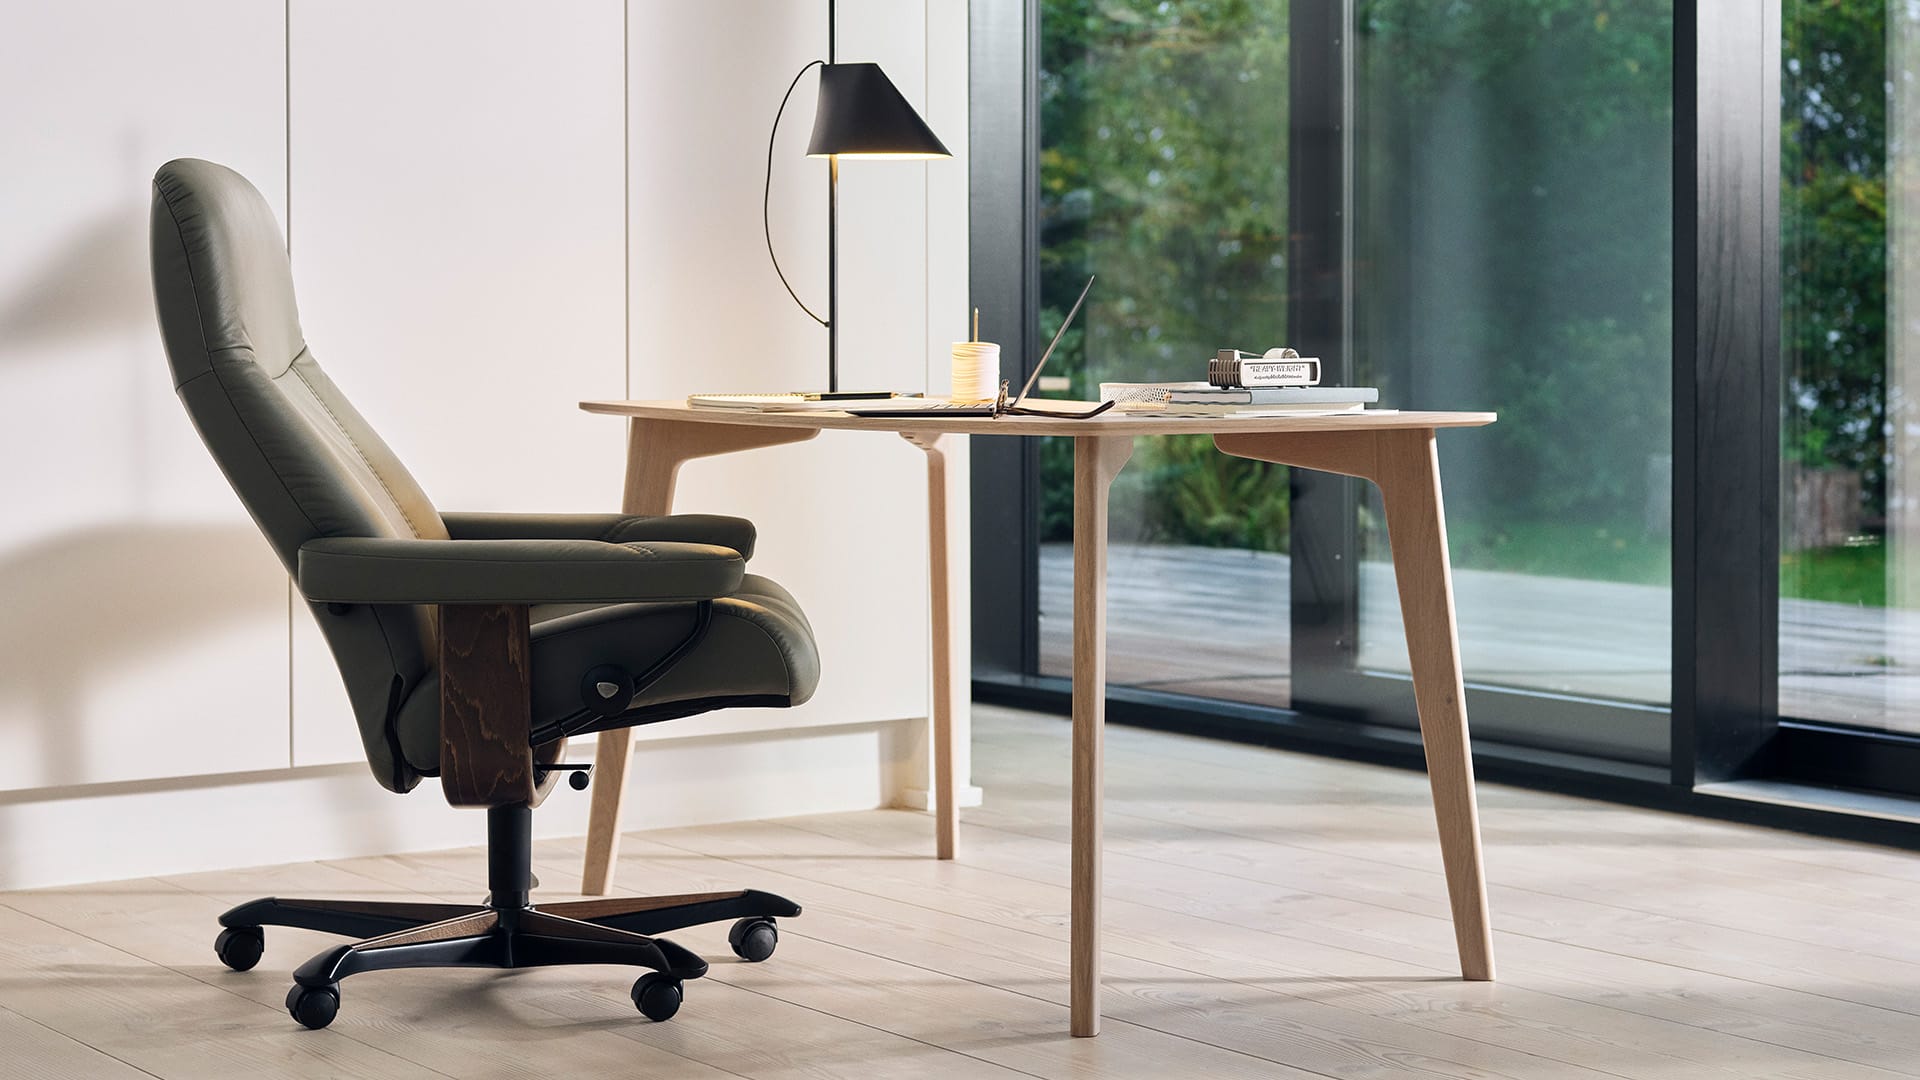 Stressless Home Office Laurel bei Hesebeck Home Company